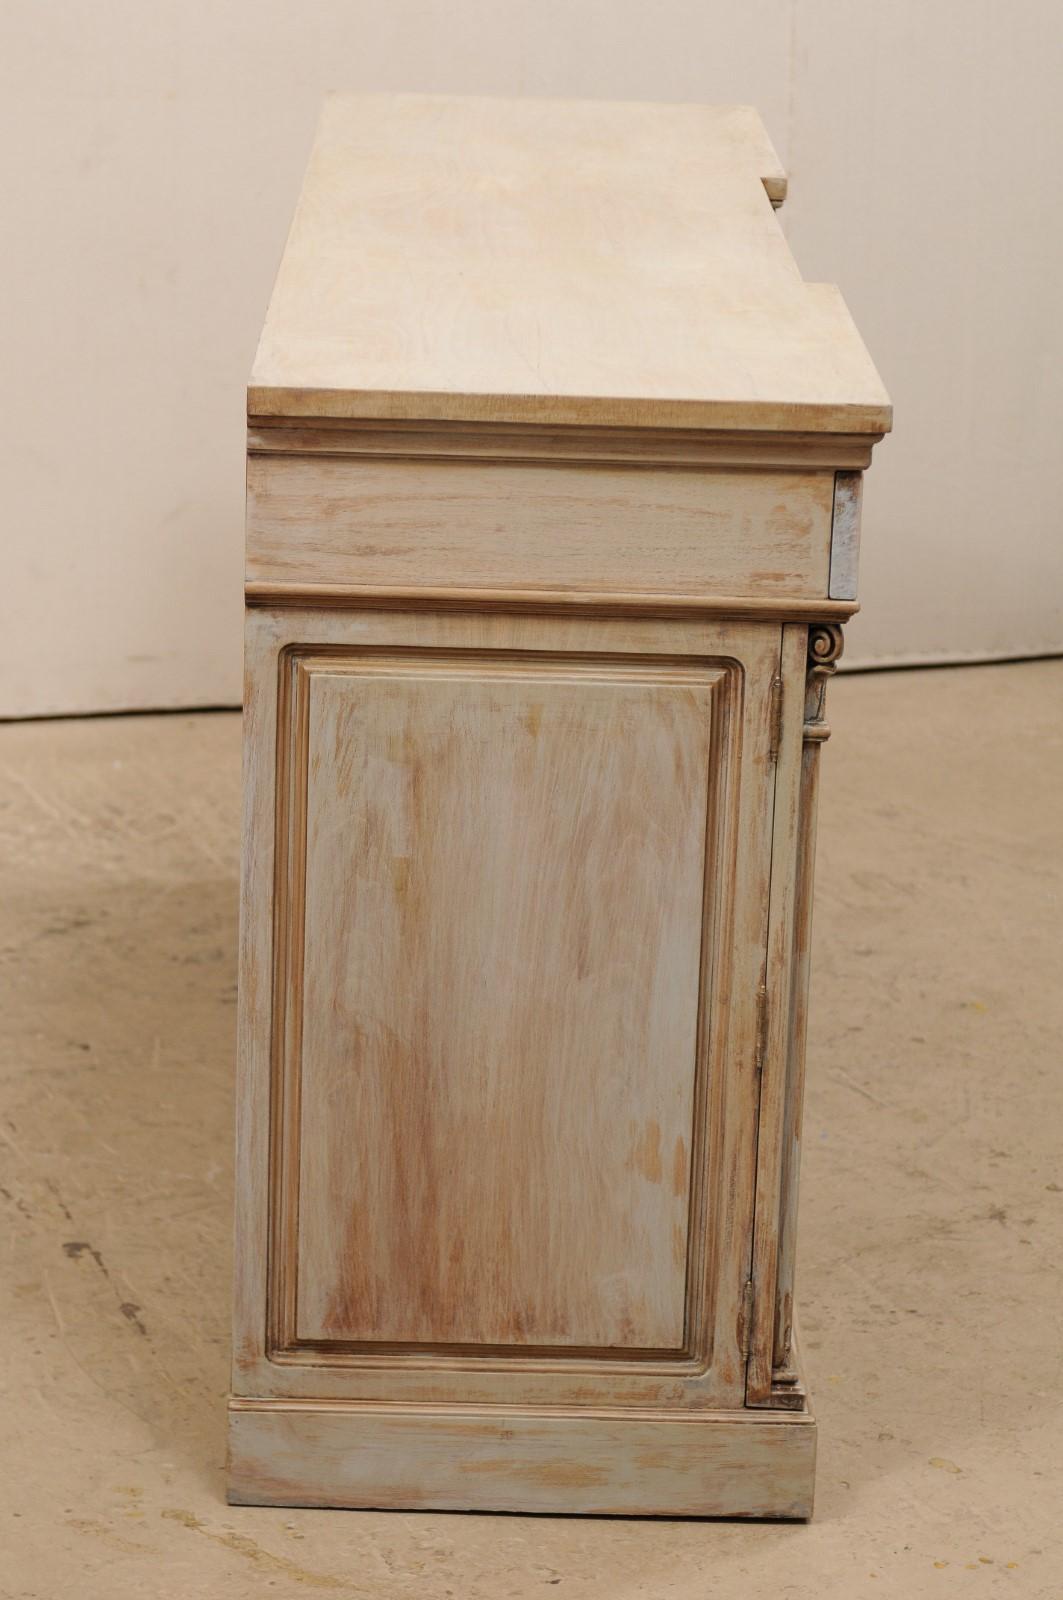 American A Mid-20th C. 6 Ft Long Painted Wood Buffet Cabinet w/ Corinthian Column Accents For Sale